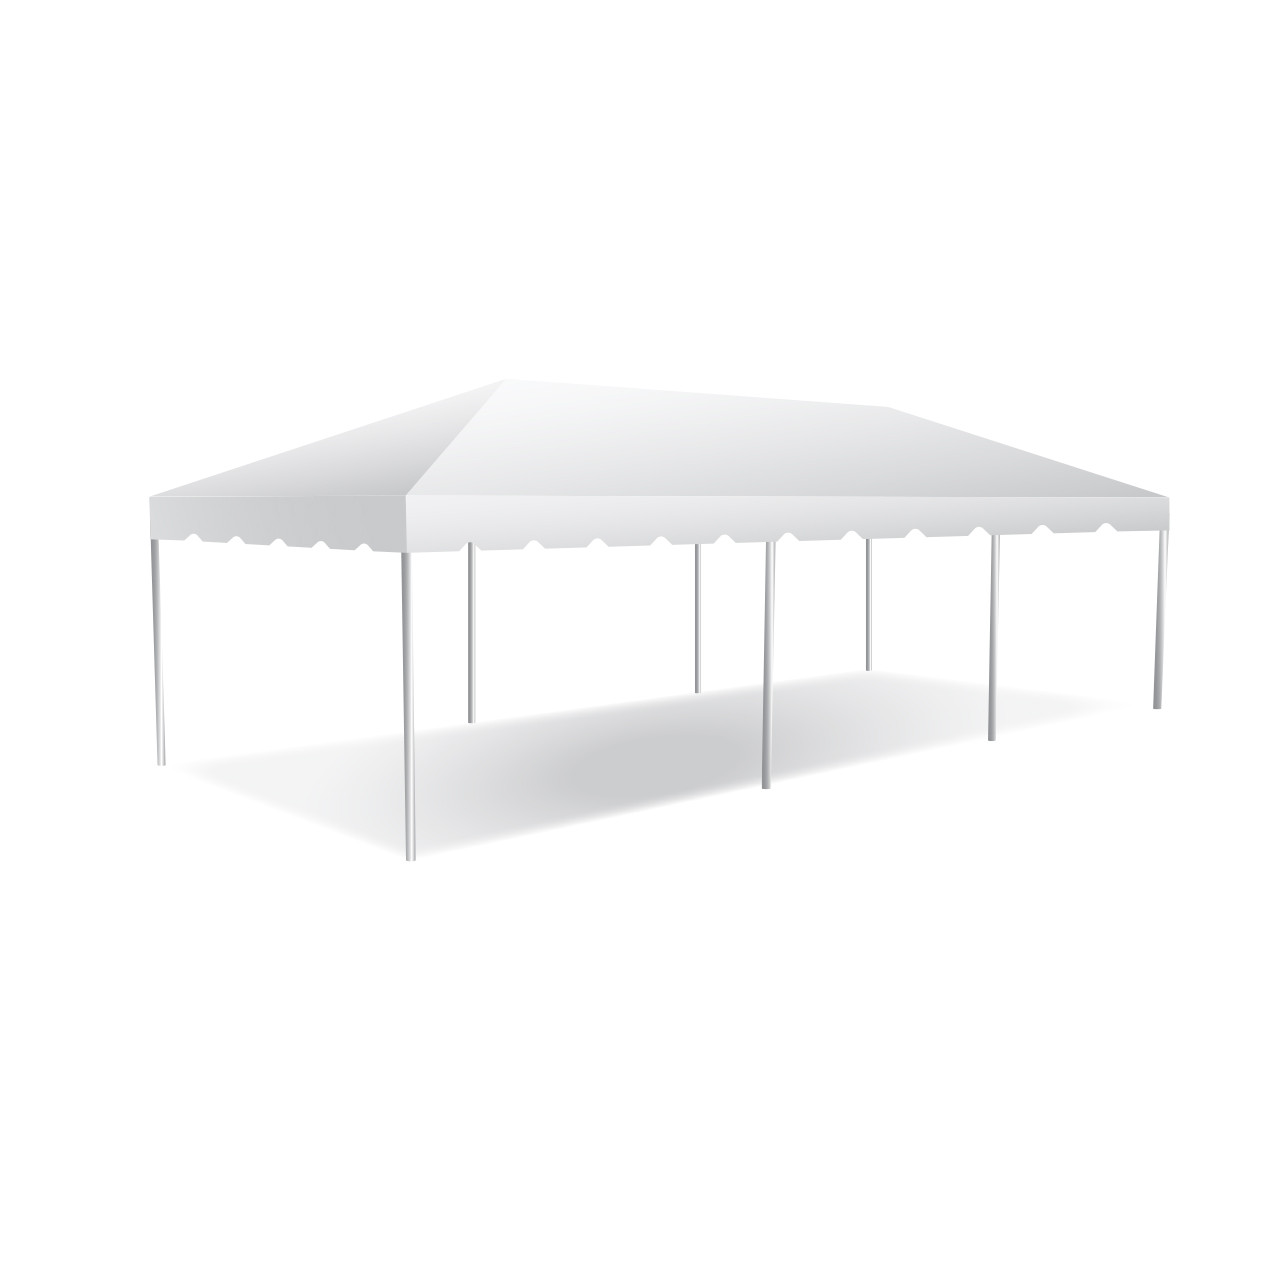 12' x 30' Classic Series Frame Tent, 1 Piece Tent Top, Complete